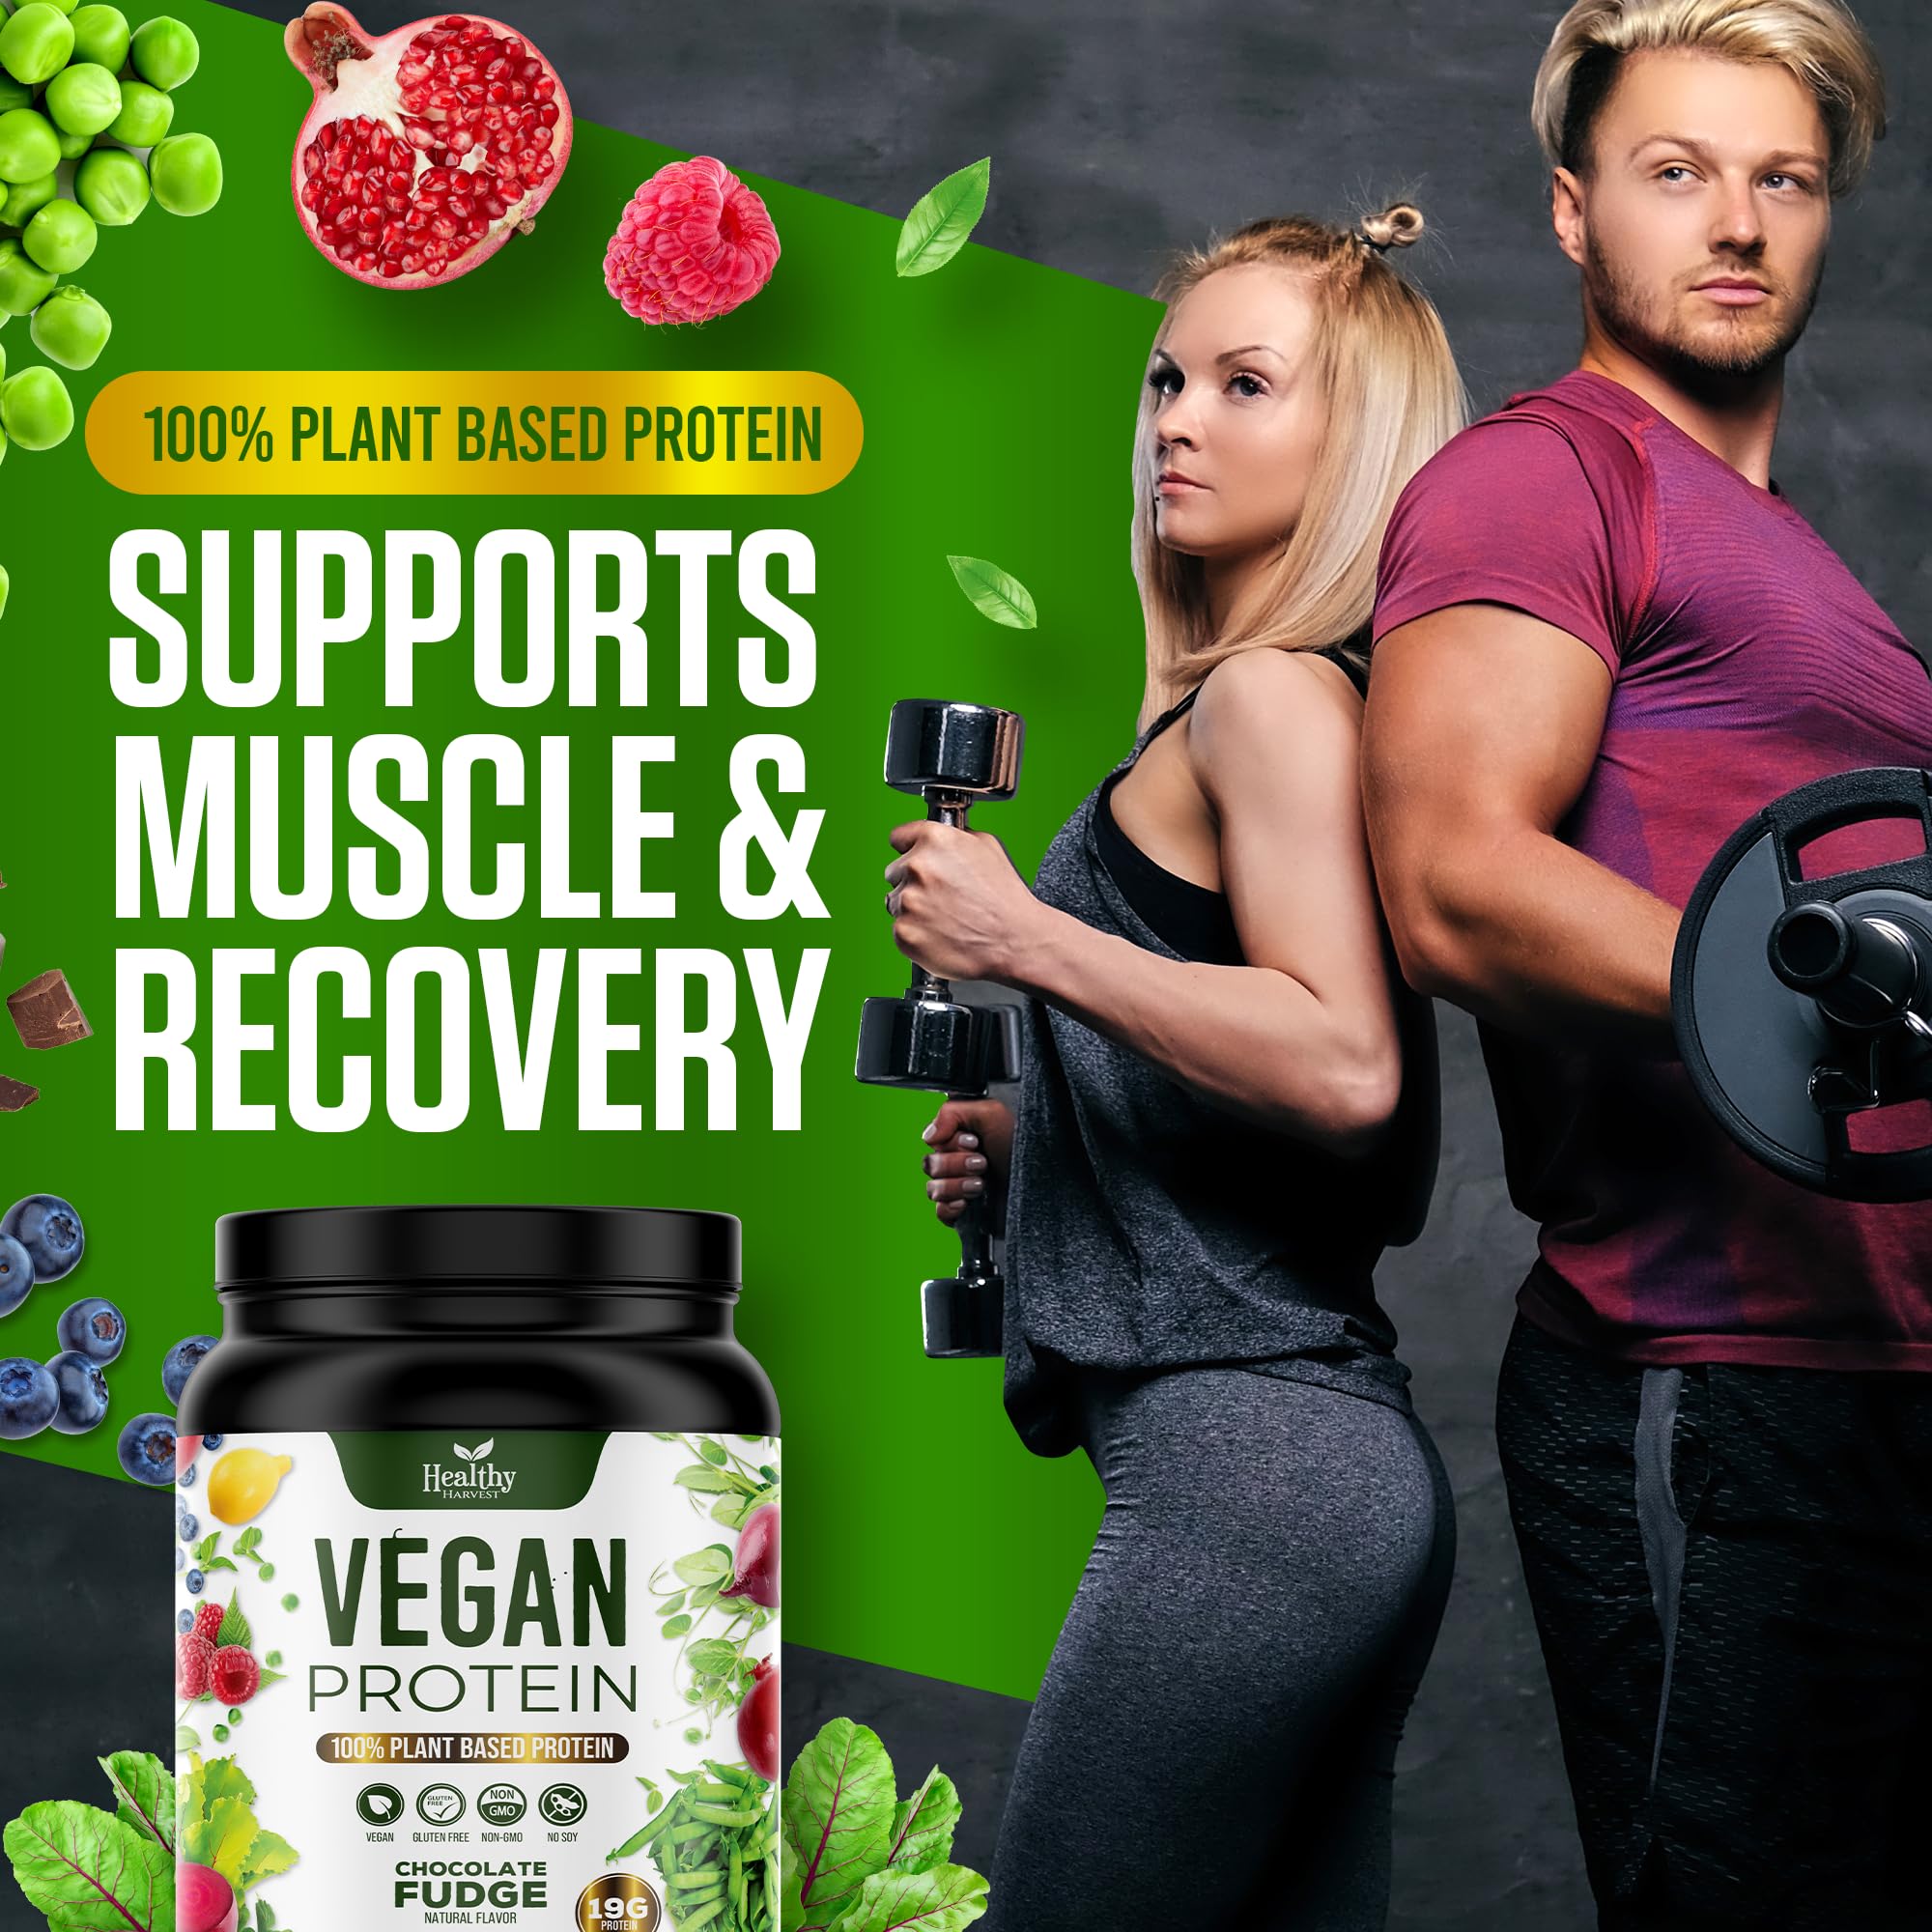 Vegan Protein Powder - 19g Plant Based Protein - Gluten, Dairy, Lactose, Soy Free, Includes Superfoods & BCAAs, For Smoothies & Shakes, Kosher, Keto-friendly, Chocolate Flavor - 2 LB, 30 Servings